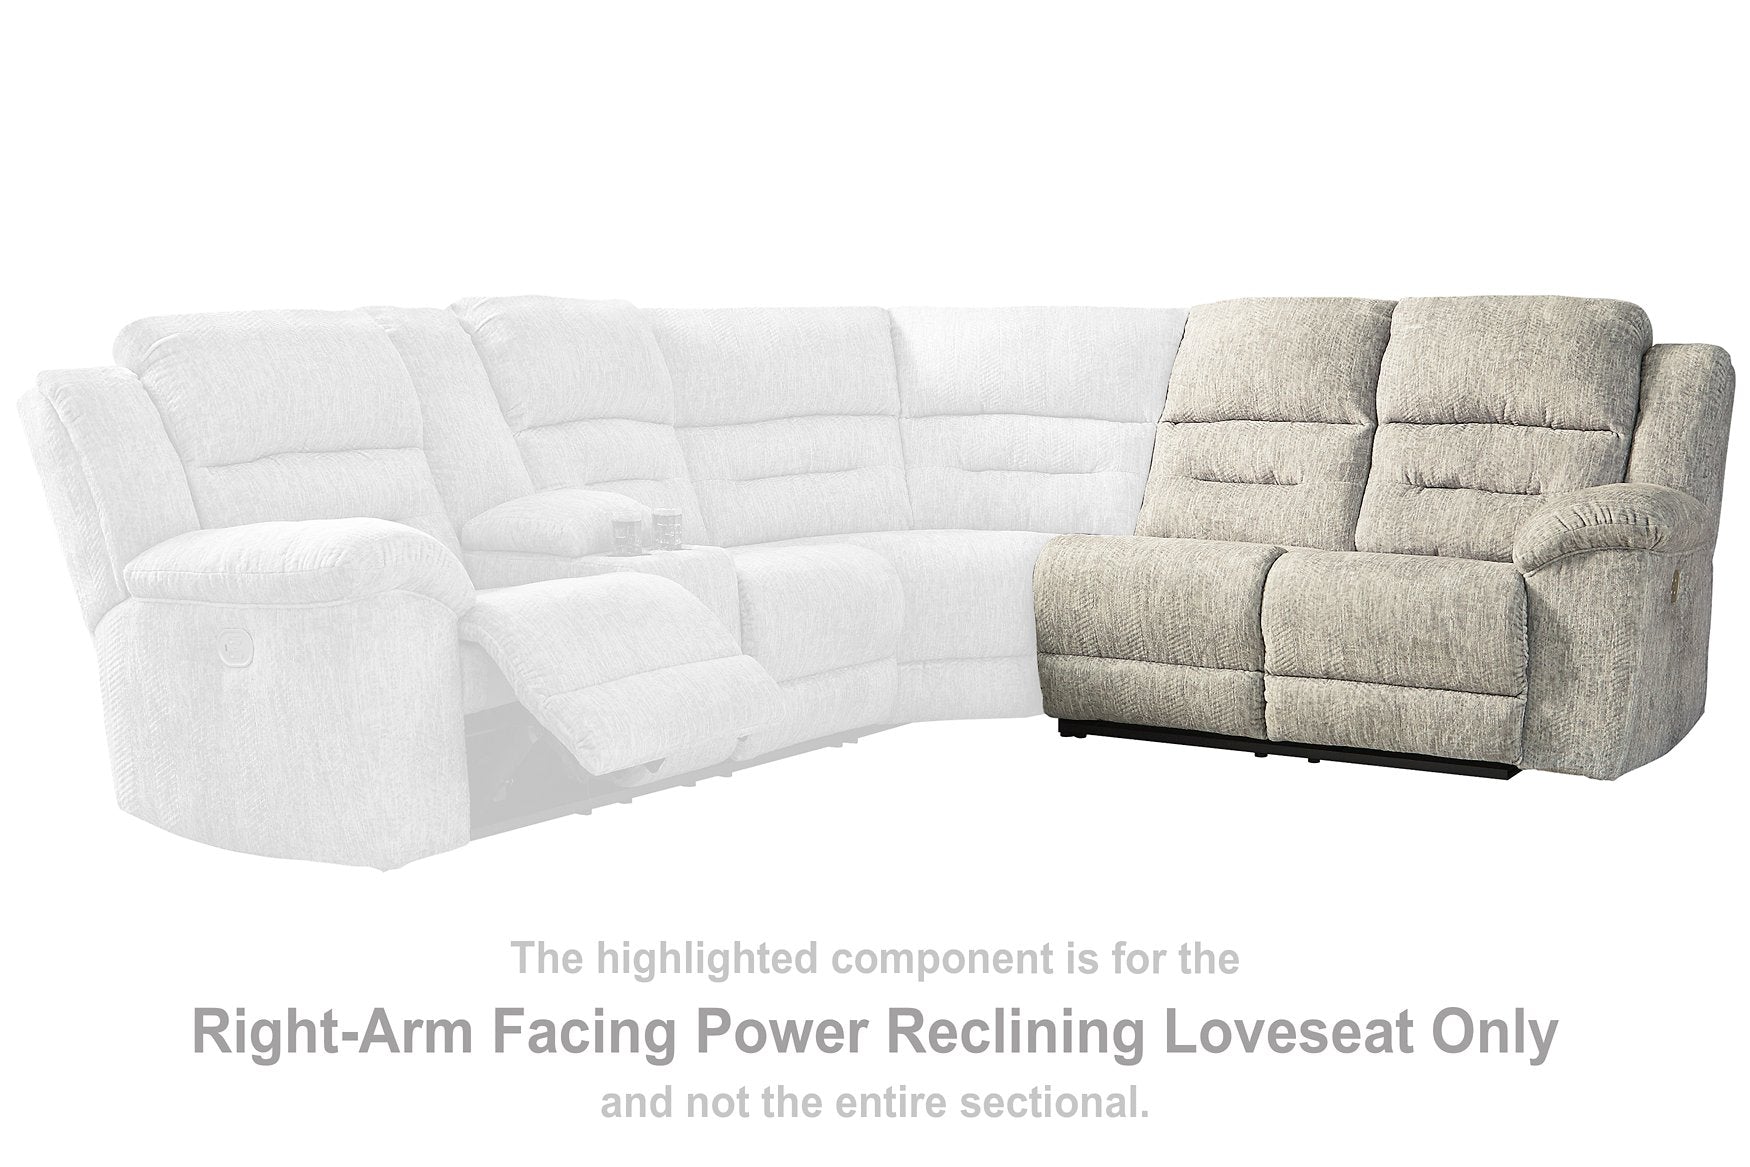 Family Den 3-Piece Power Reclining Sectional - Half Price Furniture